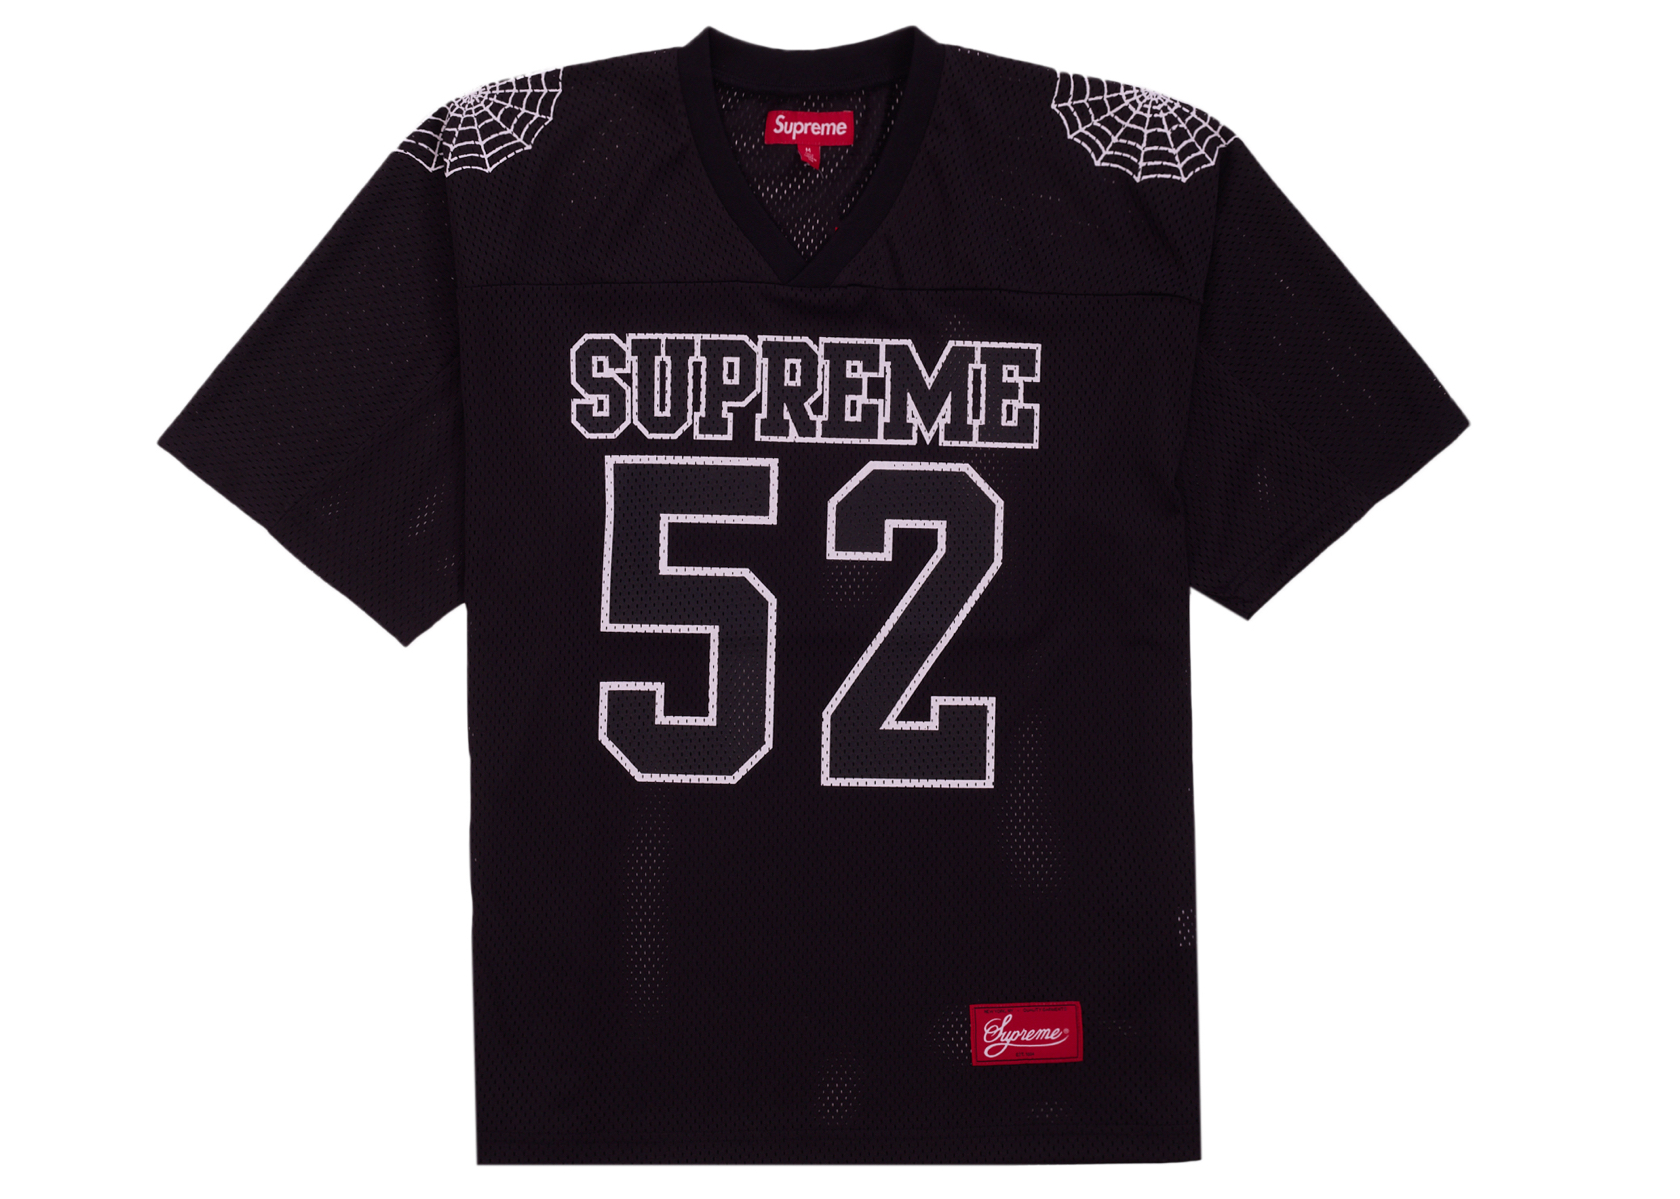 Supreme Championships Embroidered Football Jersey Black Men's ...